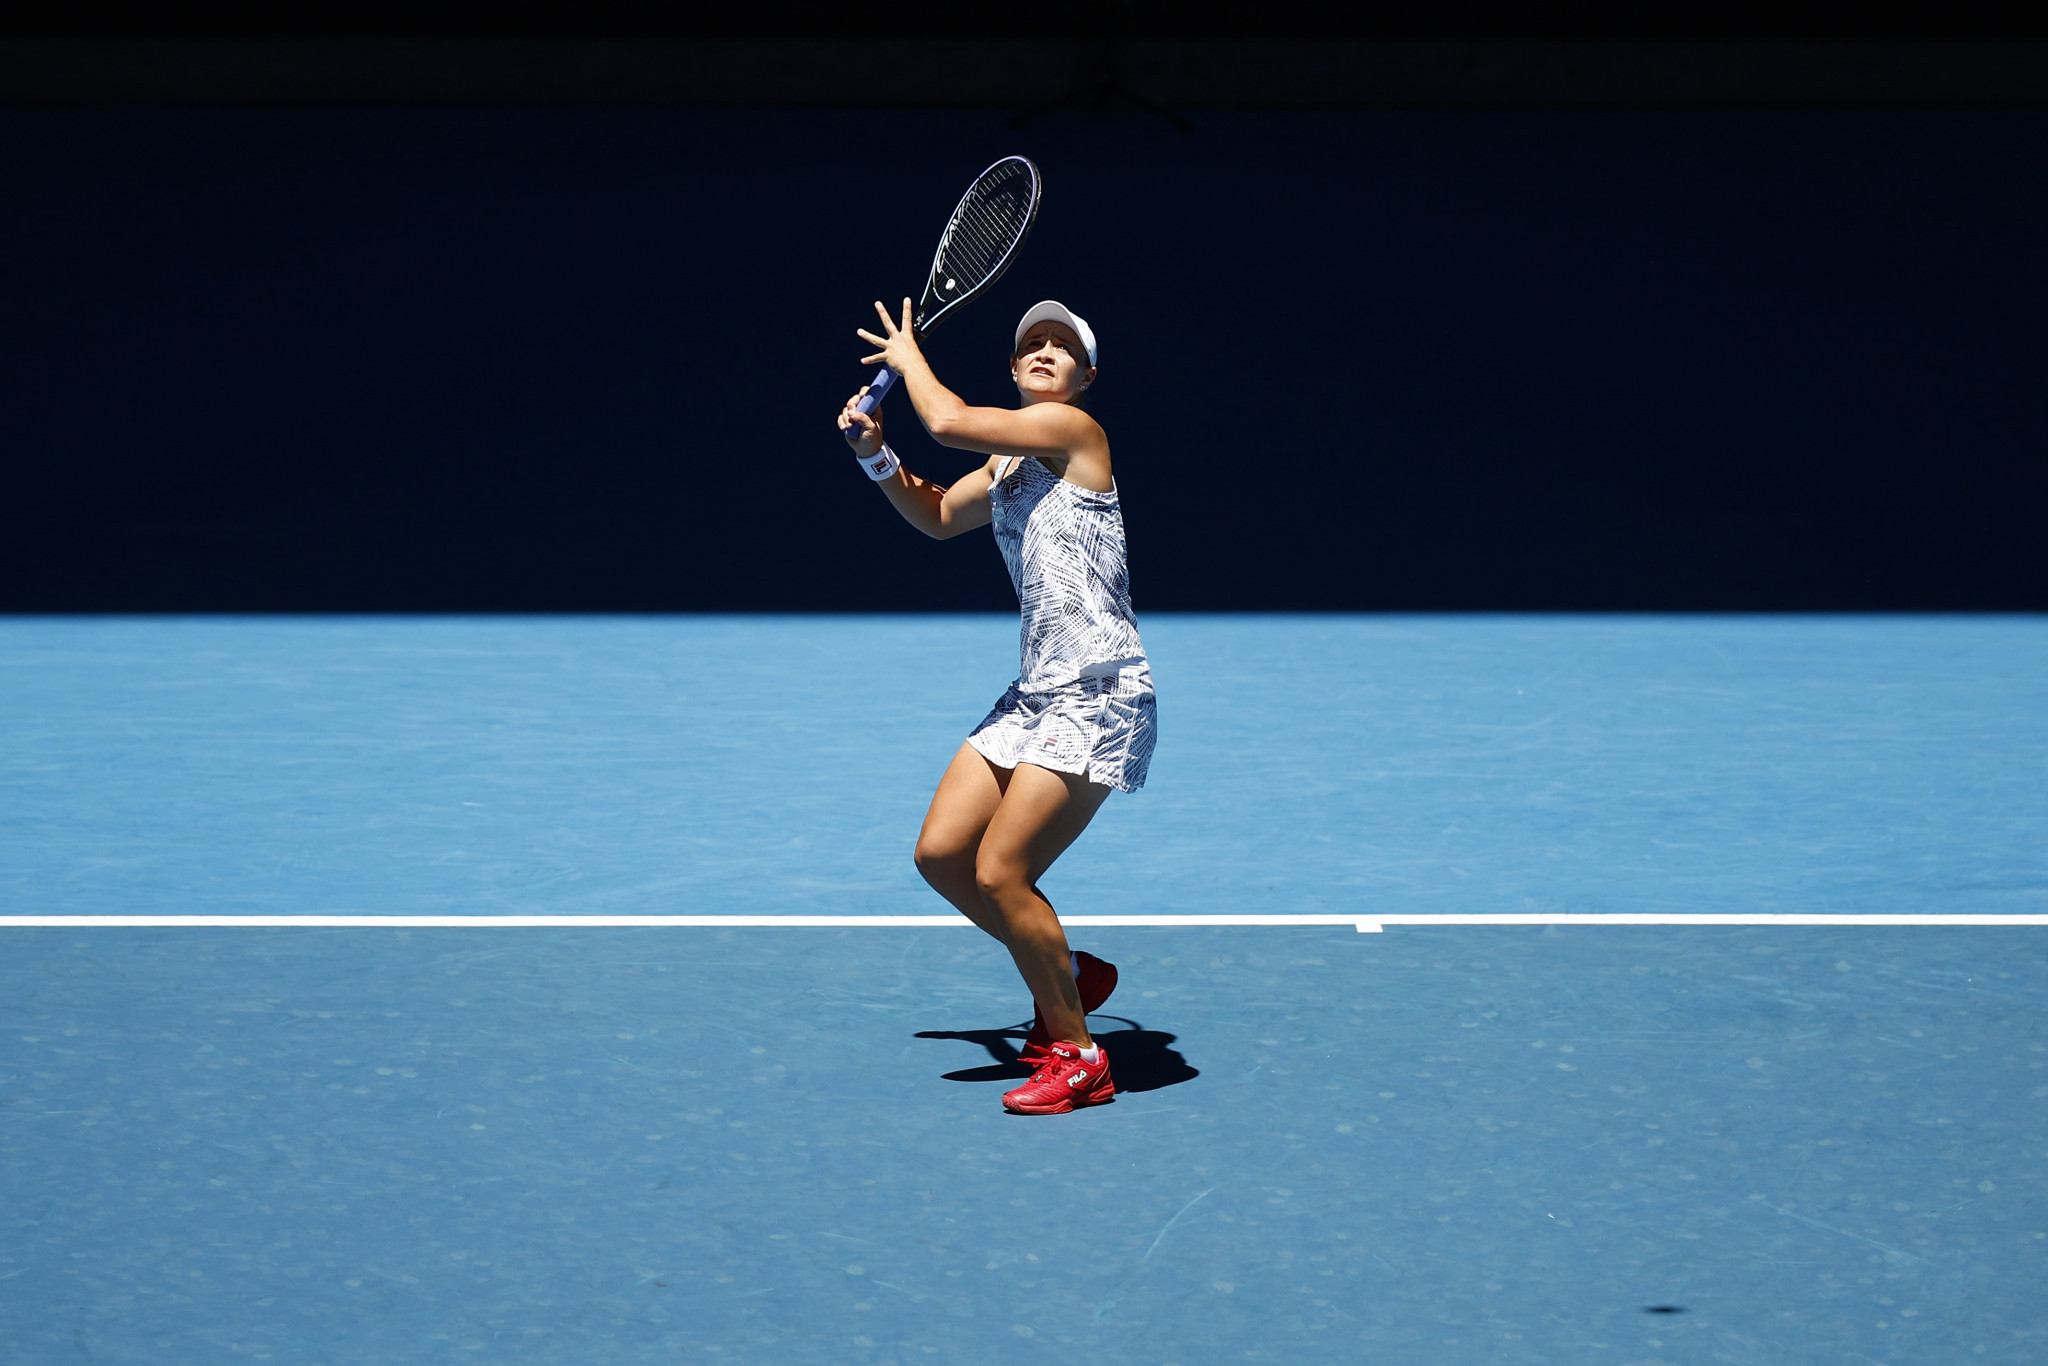 Brilliant Barty breezes into Australian Open third round as Nadal and Zverev overpower opponents